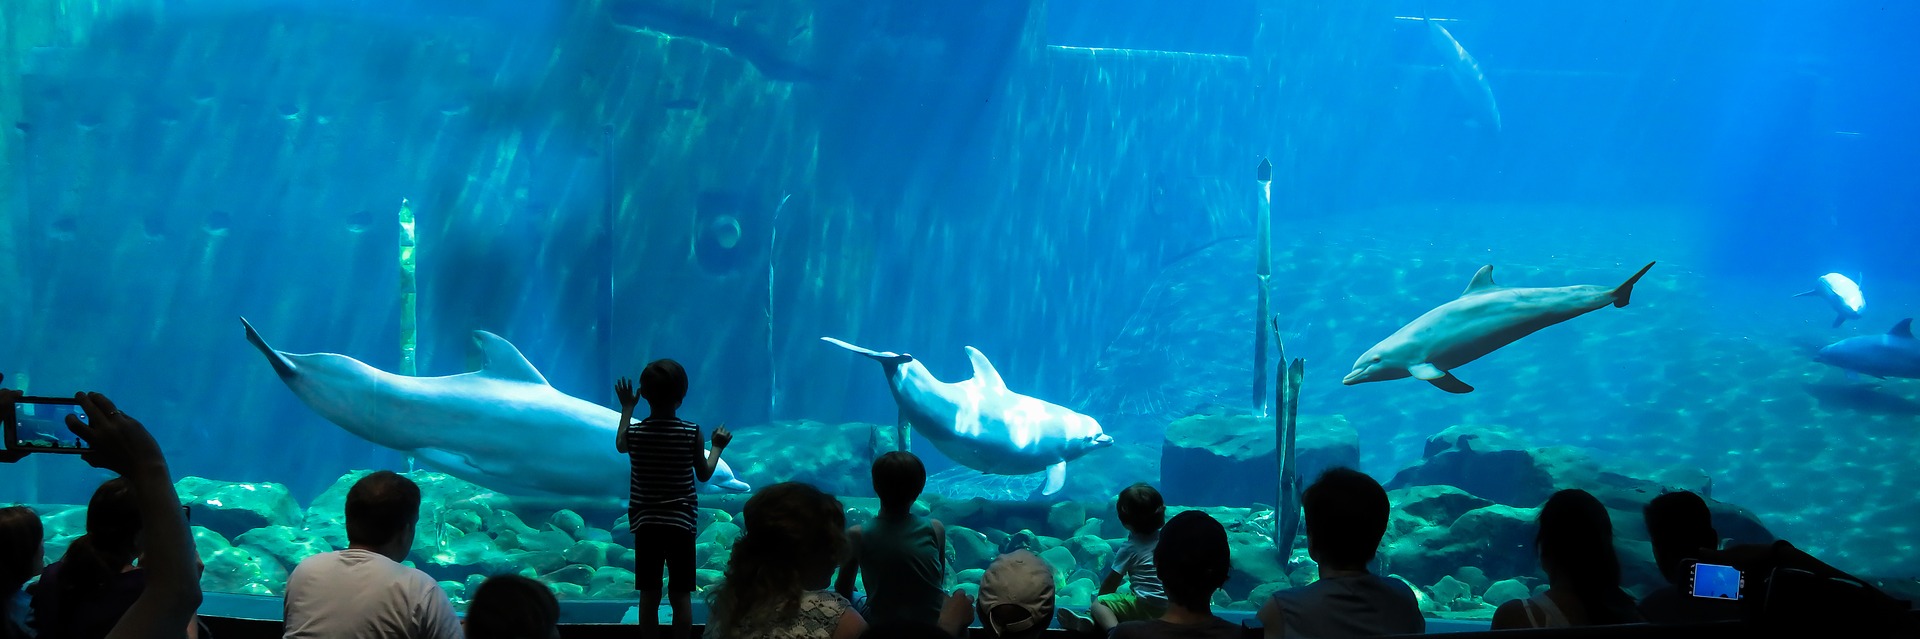 5 Top Most Largest Aquariums in the World